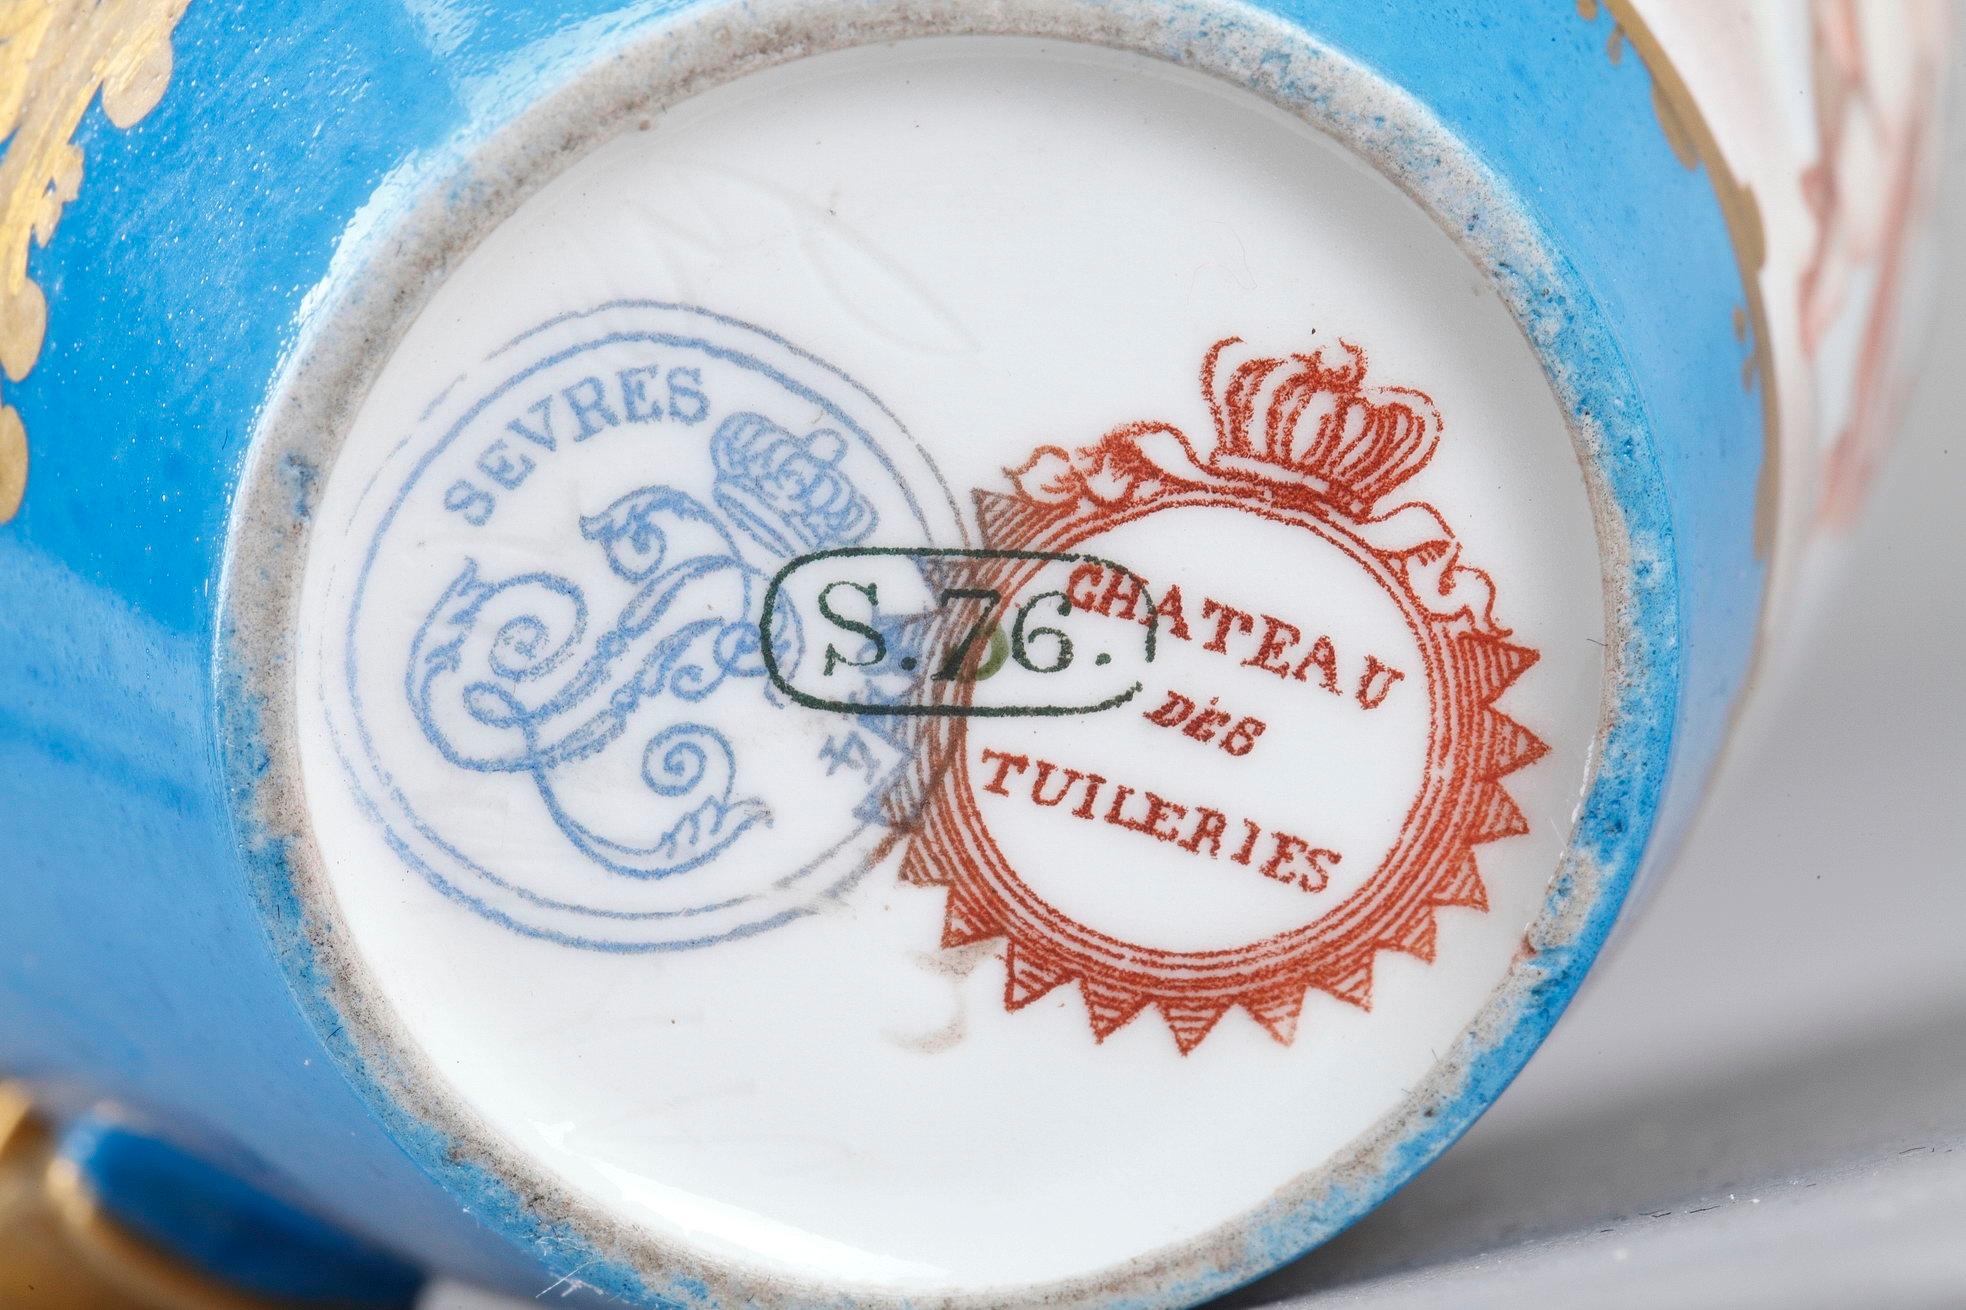 Tea Service with Sevres and Château des Tuileries Marks For Sale 7